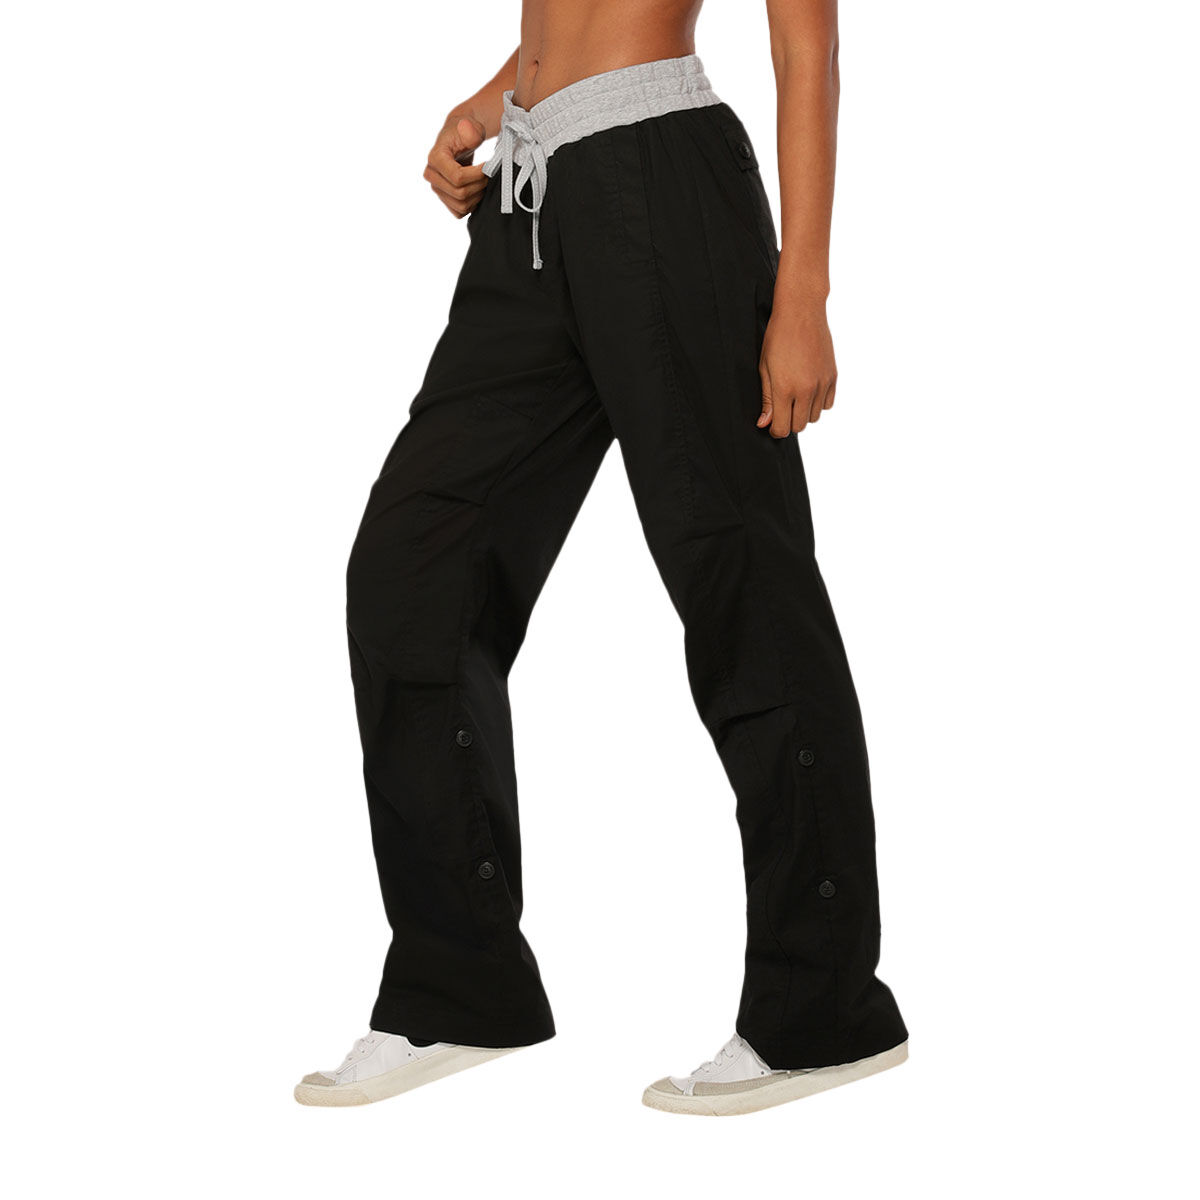 Bestgift Men's Tight Woven Fabric Normal Waist Cargo Pants S Black :  : Clothing, Shoes & Accessories